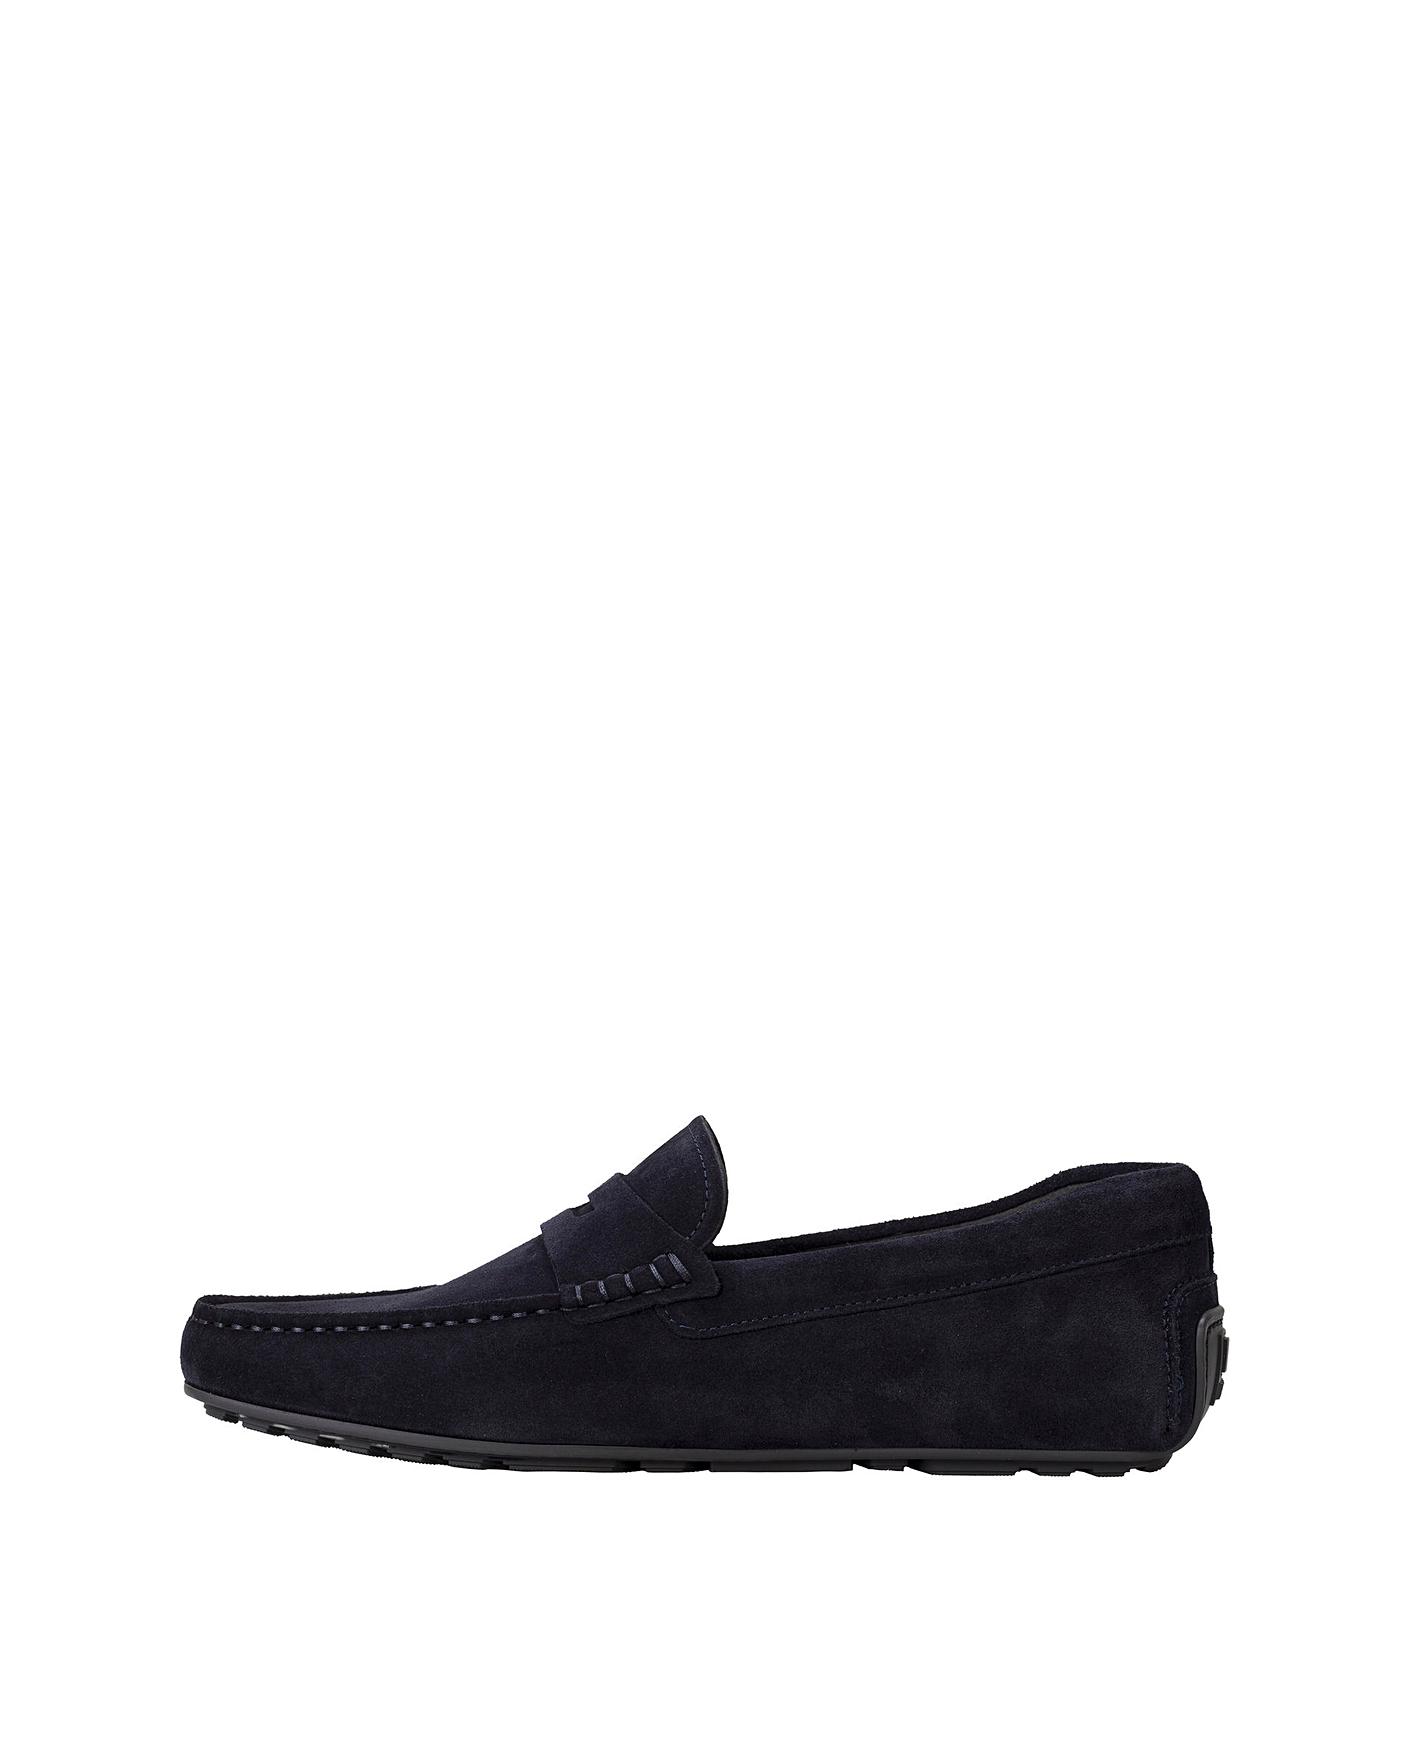 BOSS Noel Moccasin Suede Driver | Fashion World